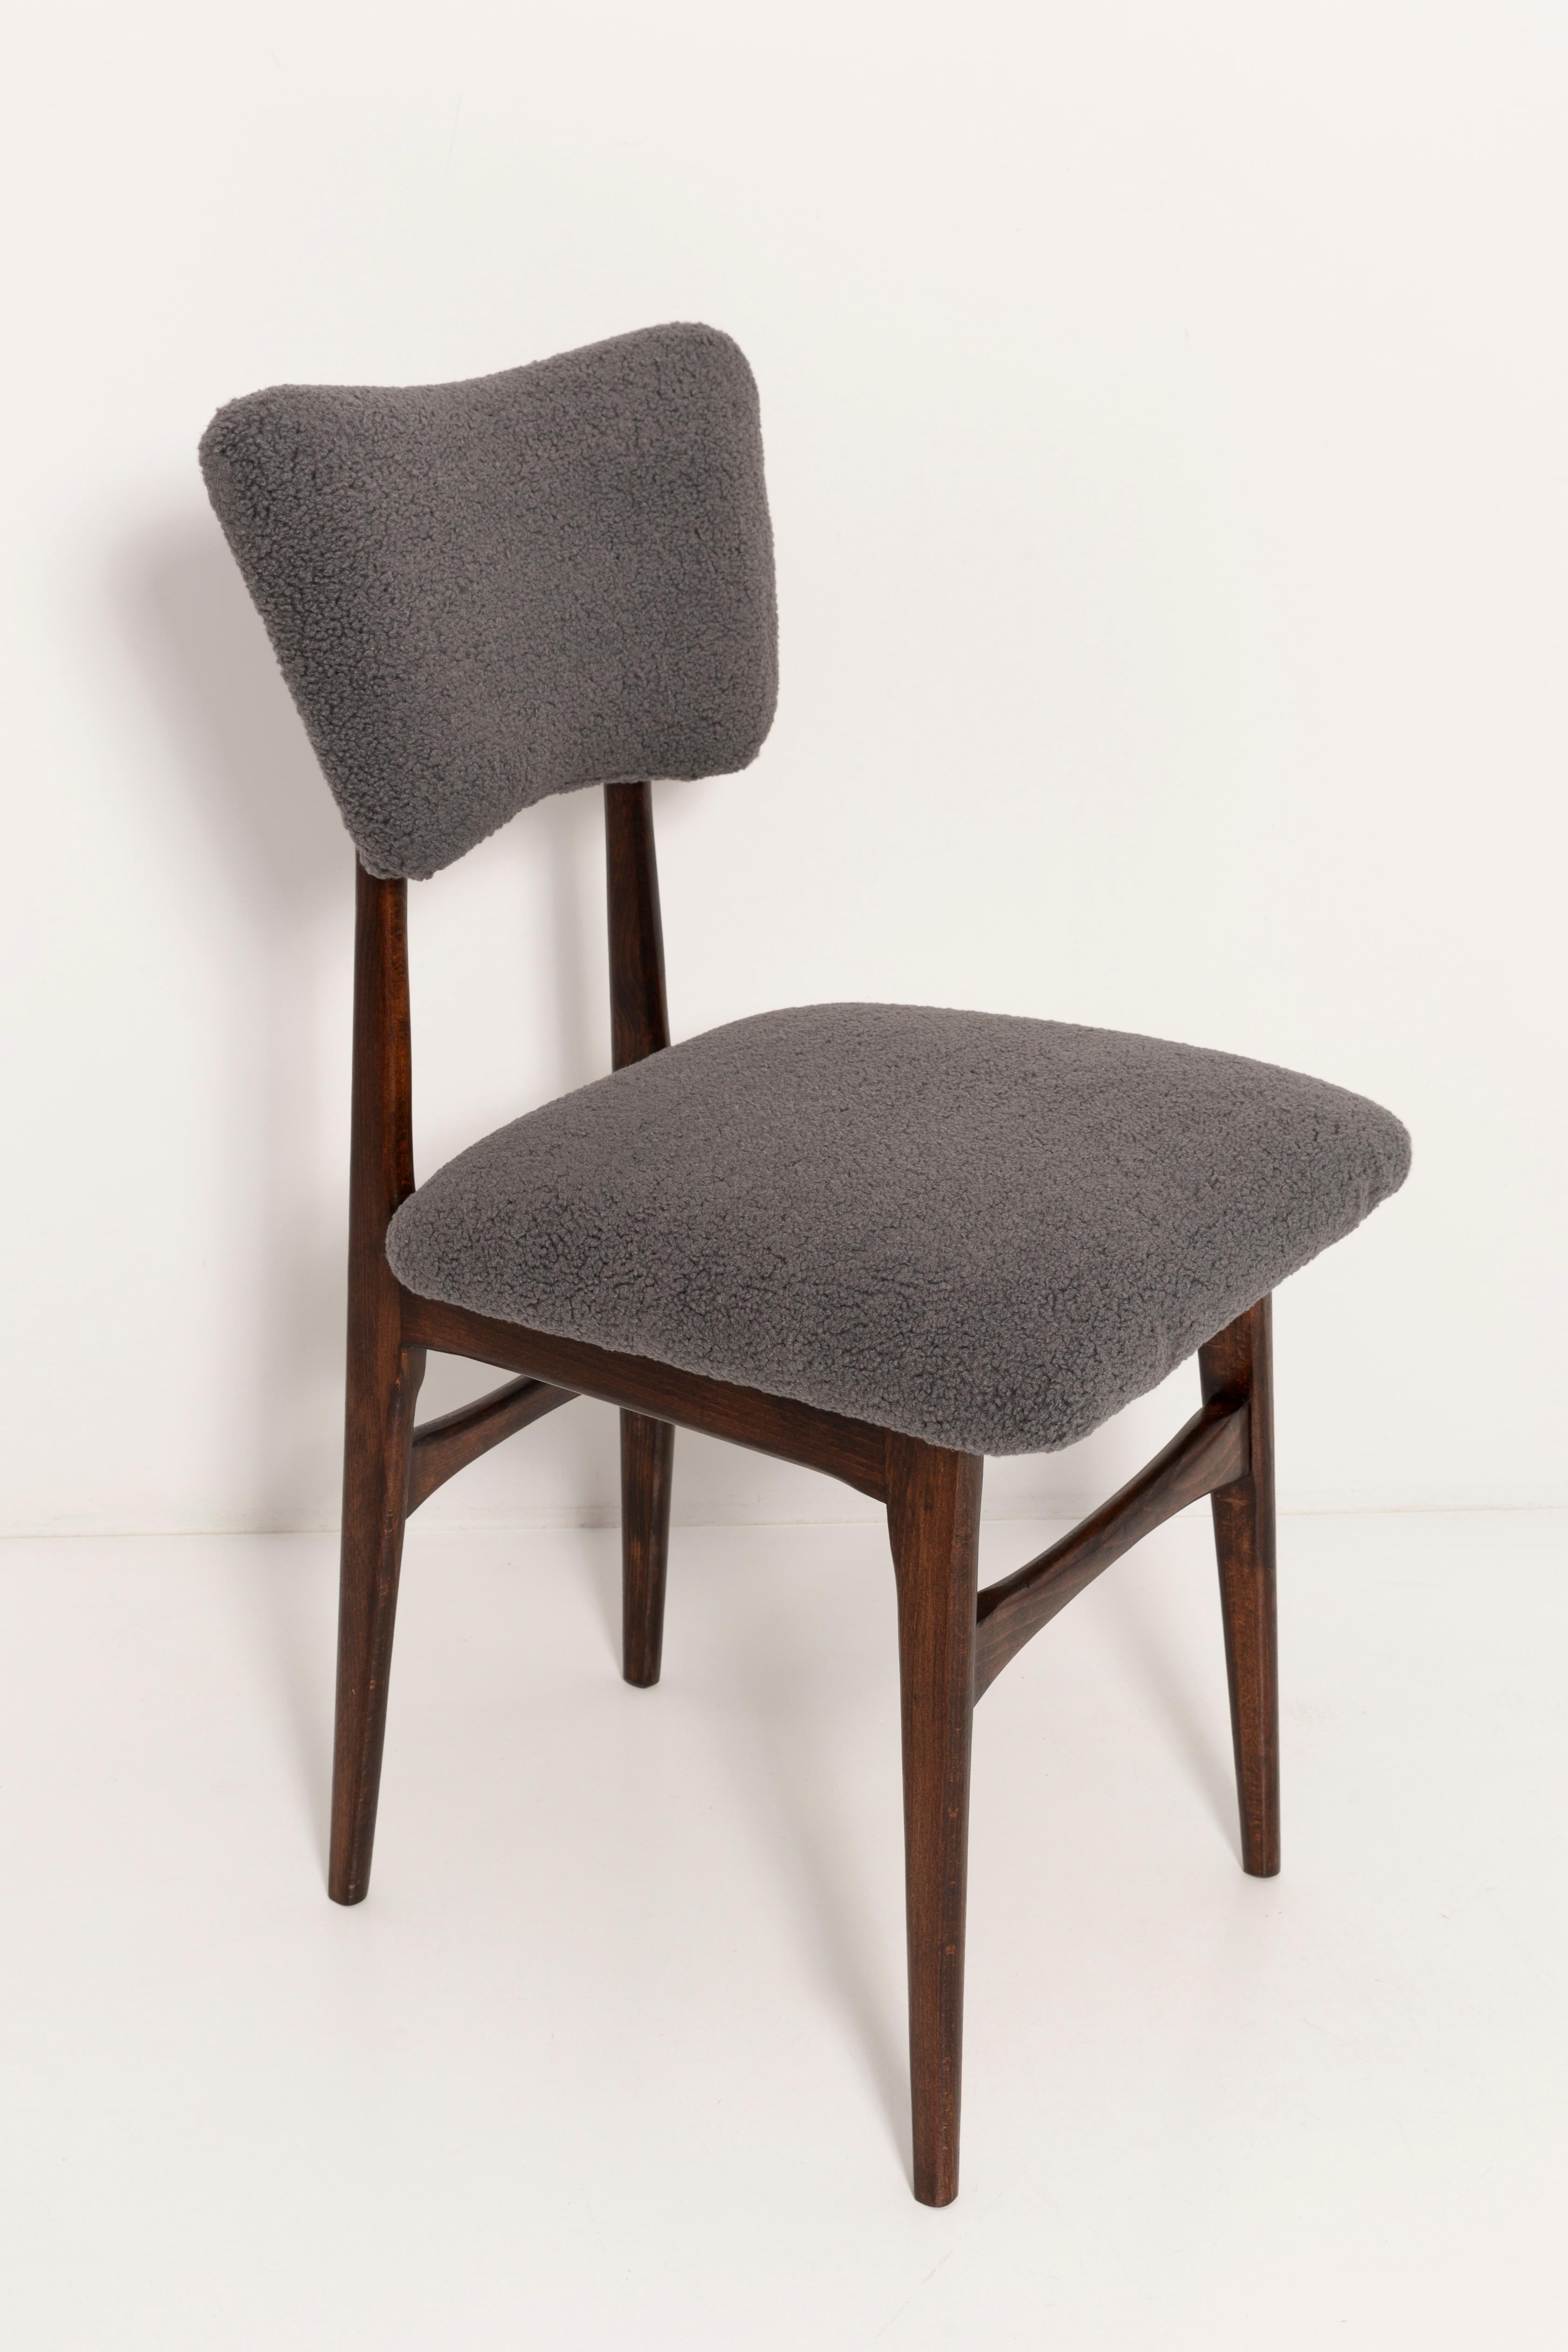 Polish Set of Two 20th Century Chairs in Dark Boucle, Europe, 1960s For Sale